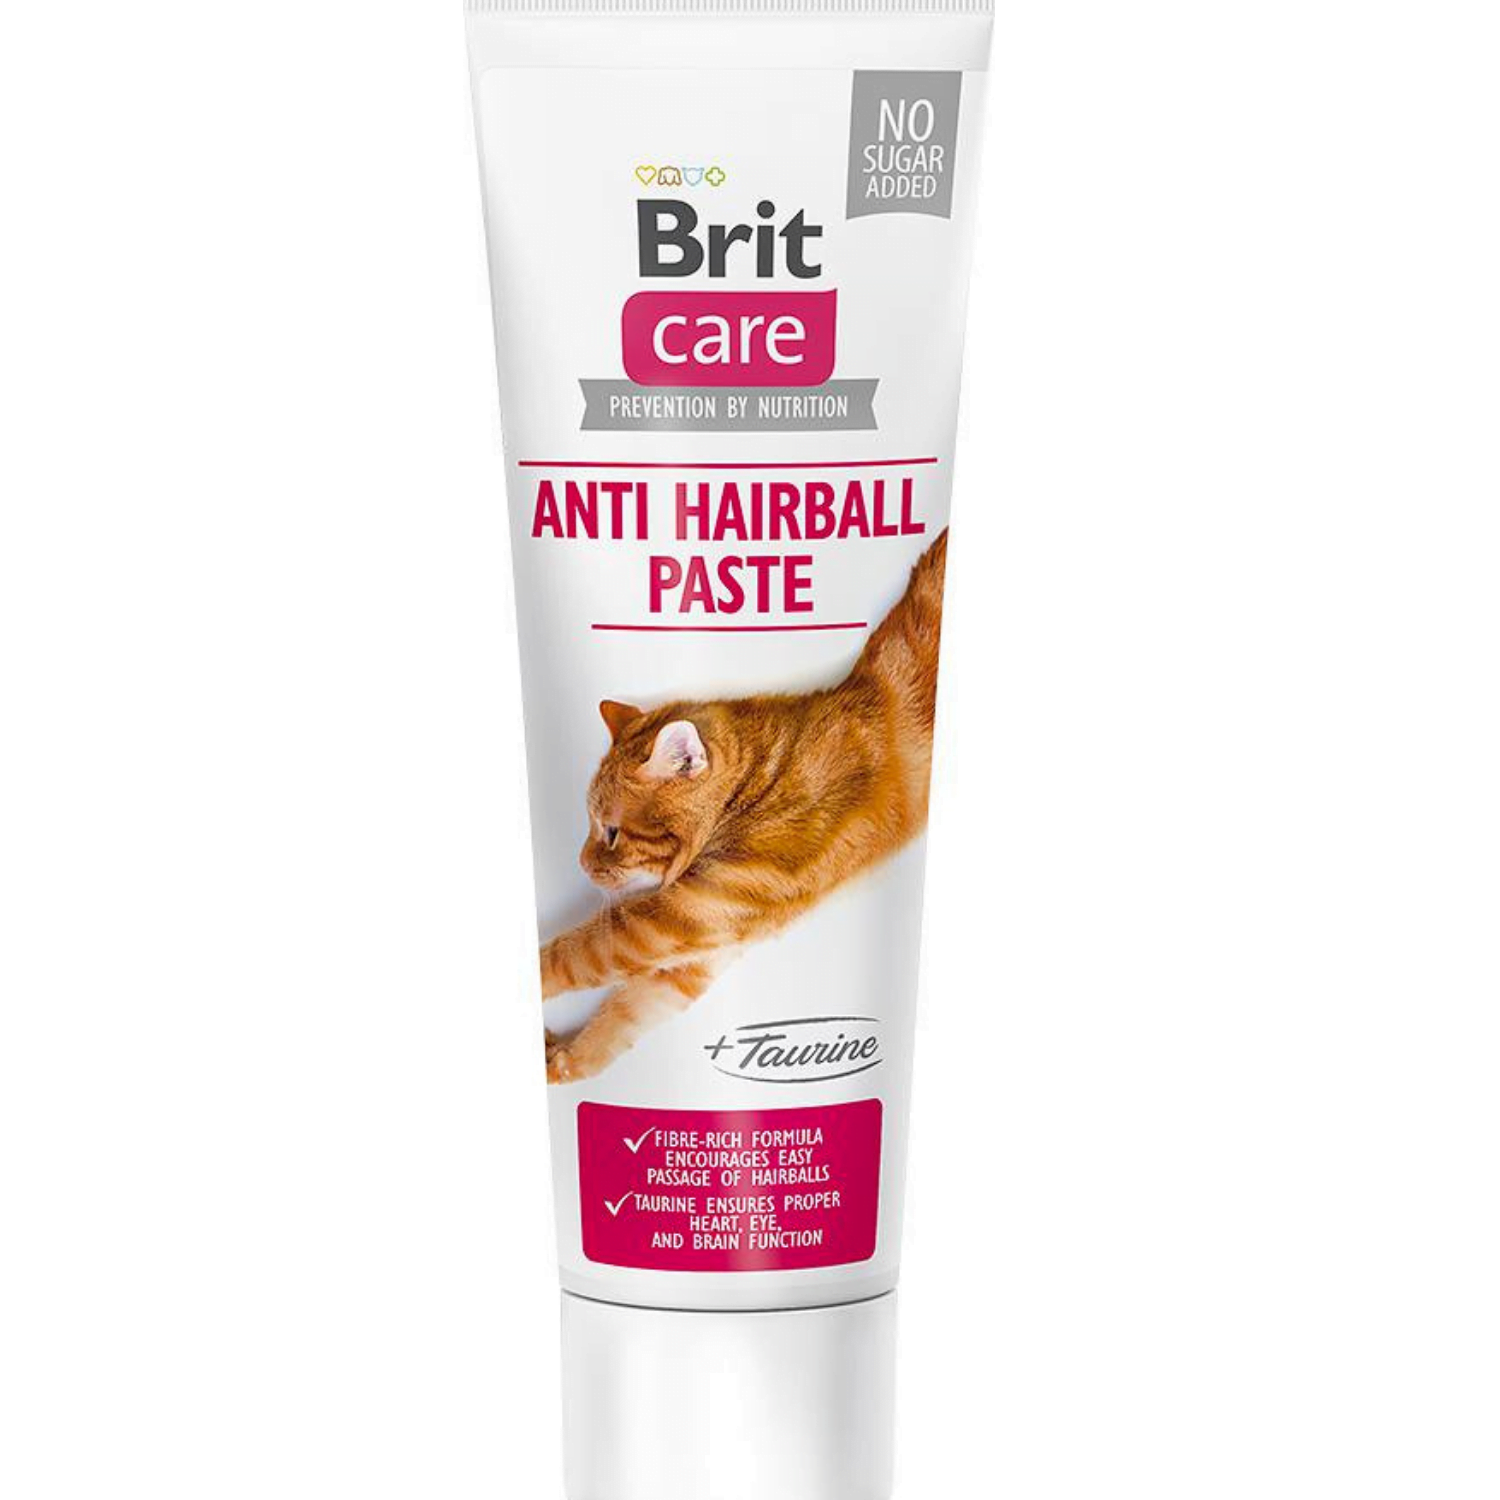 Brit Care Cat Paste Anti Hairball With Taurine 100G